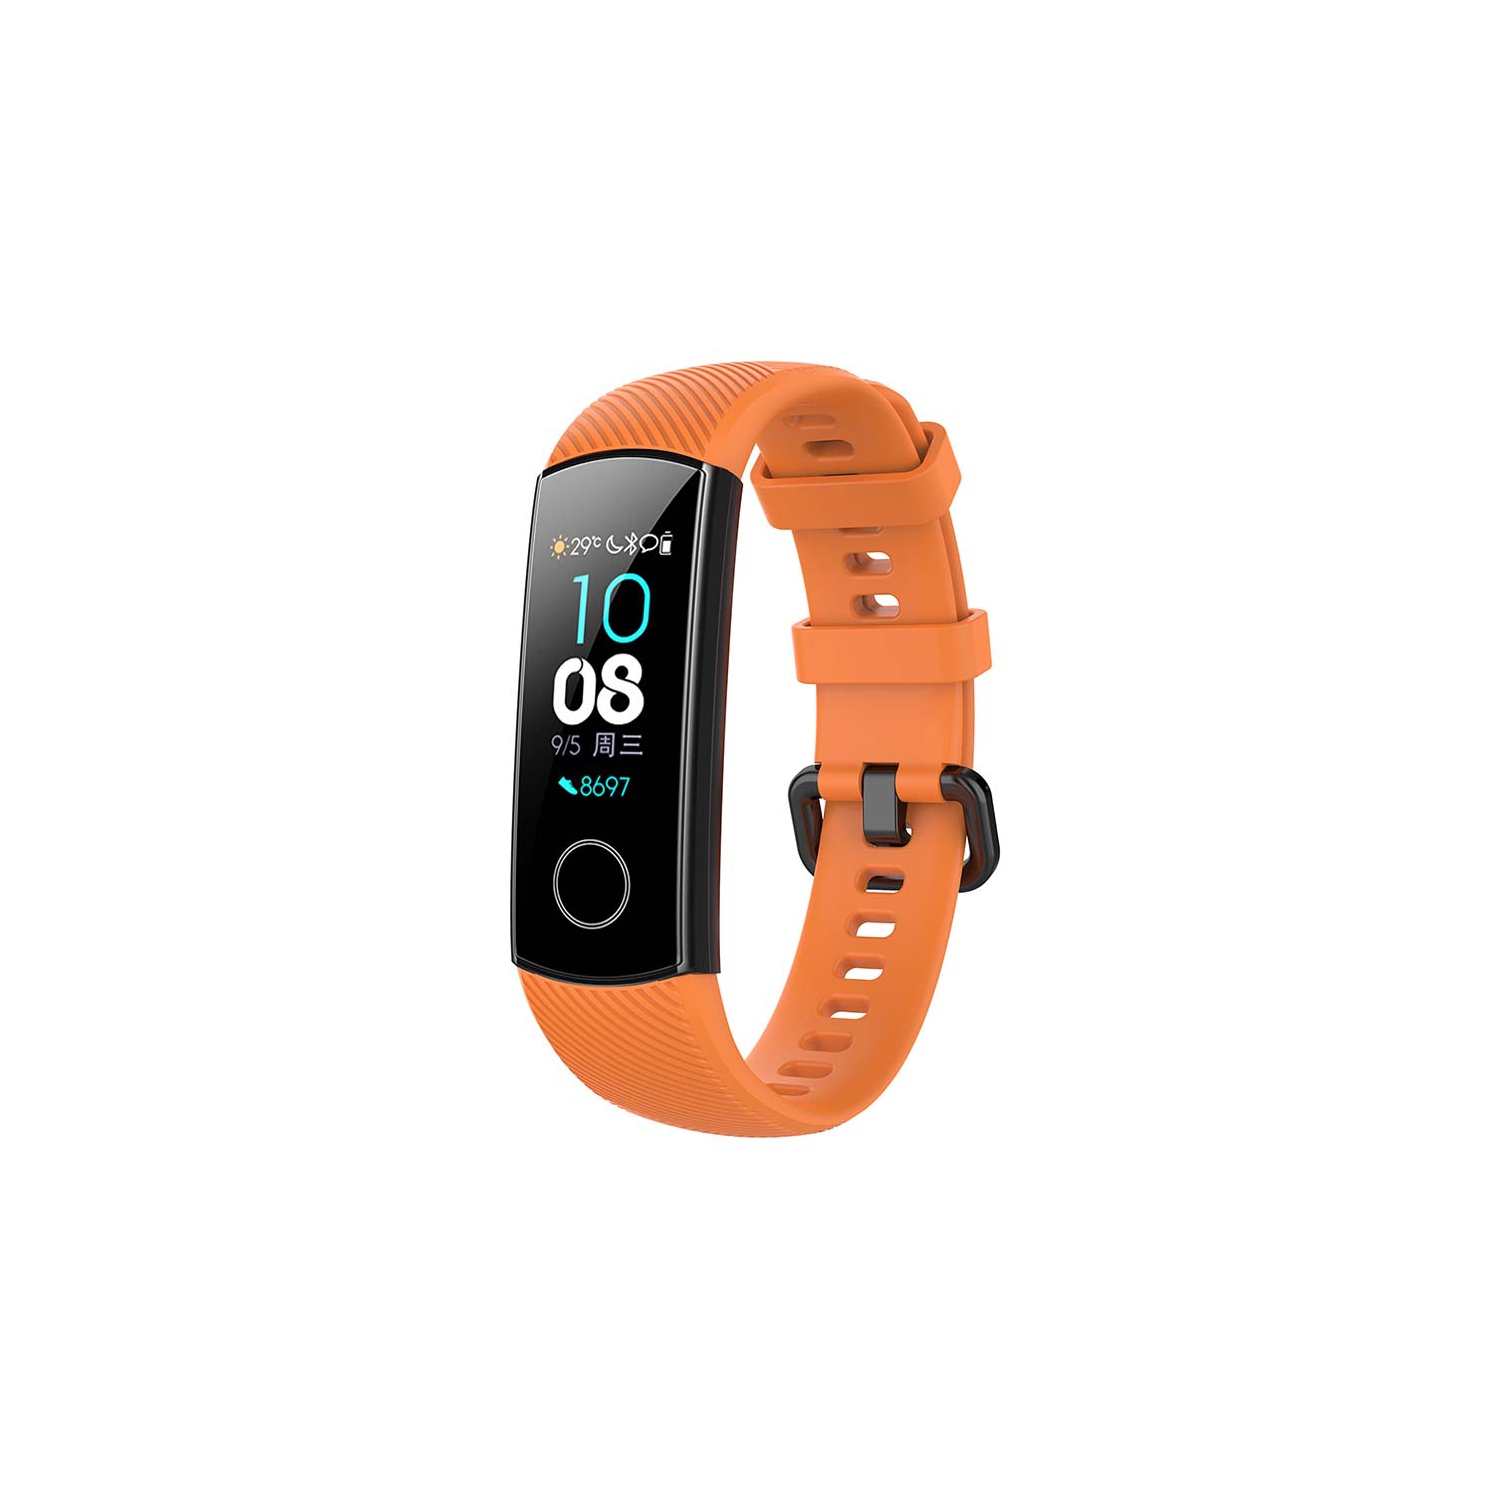 StrapsCo Silicone Rubber Watch Band Strap for Huawei Honor Band 4 - Orange